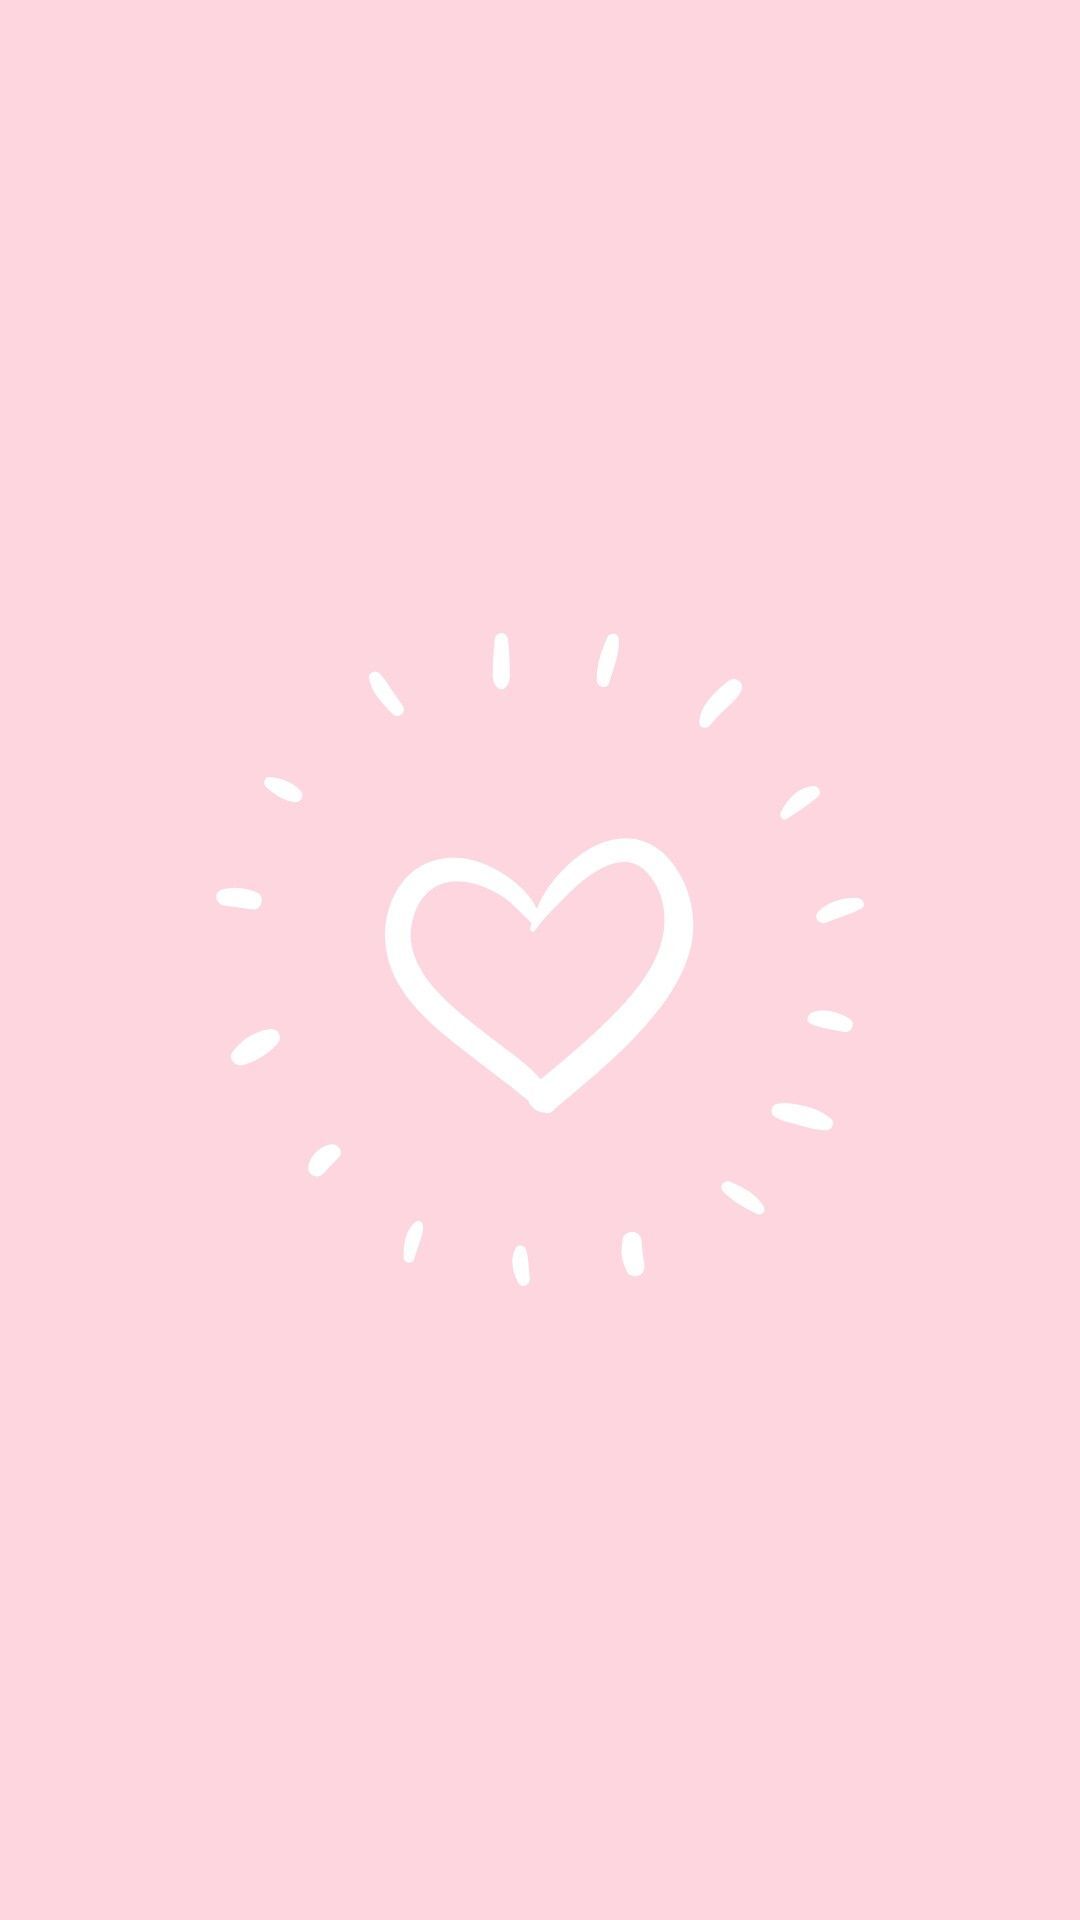 A heart shaped drawing on pink background - Heart